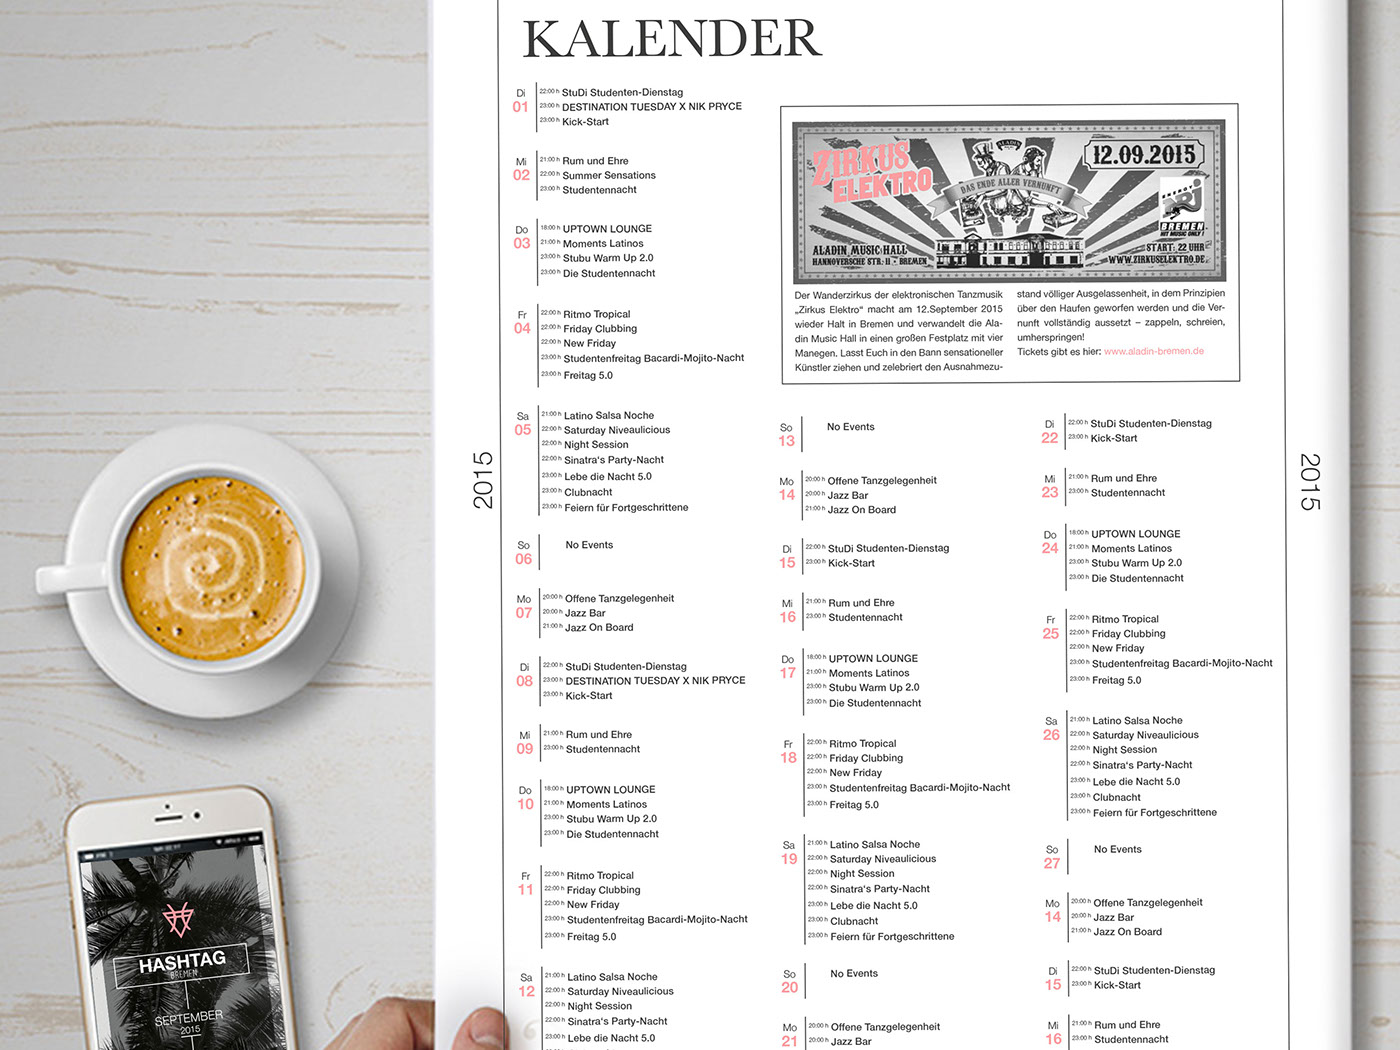 hashtag Bremen cover newspaper magazine monthly Calender Events photos lifestyle